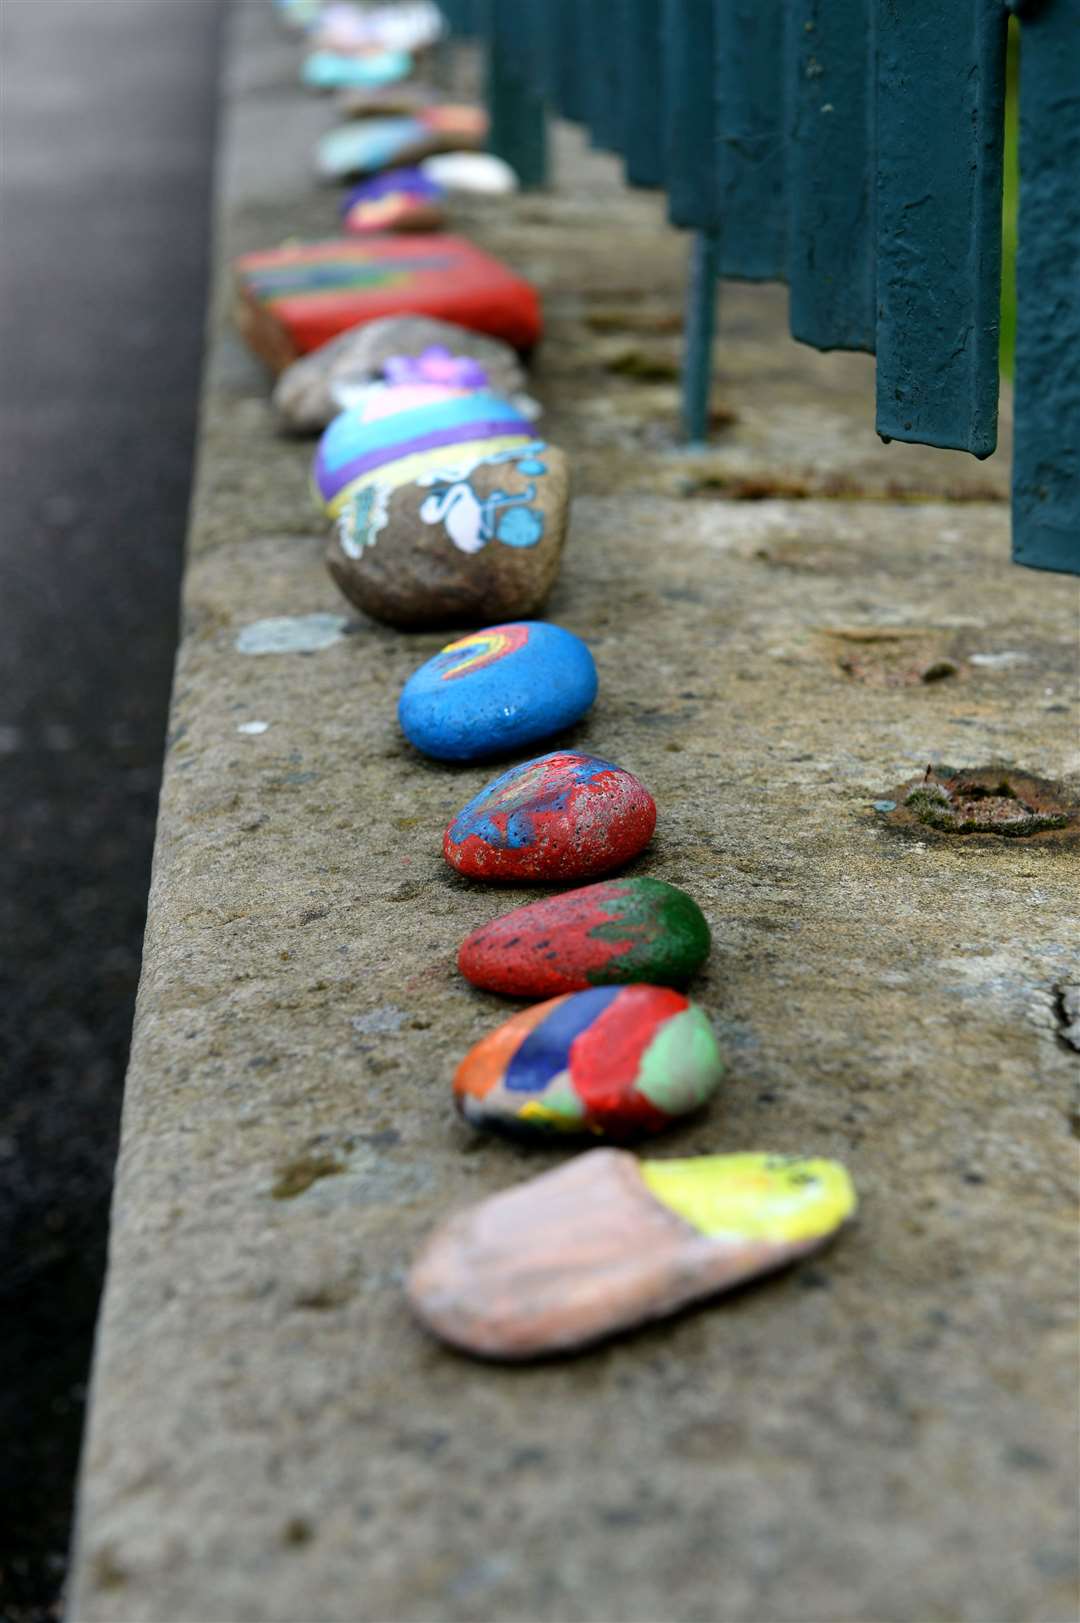 The stones are a bid to cheer people up at a difficult time.